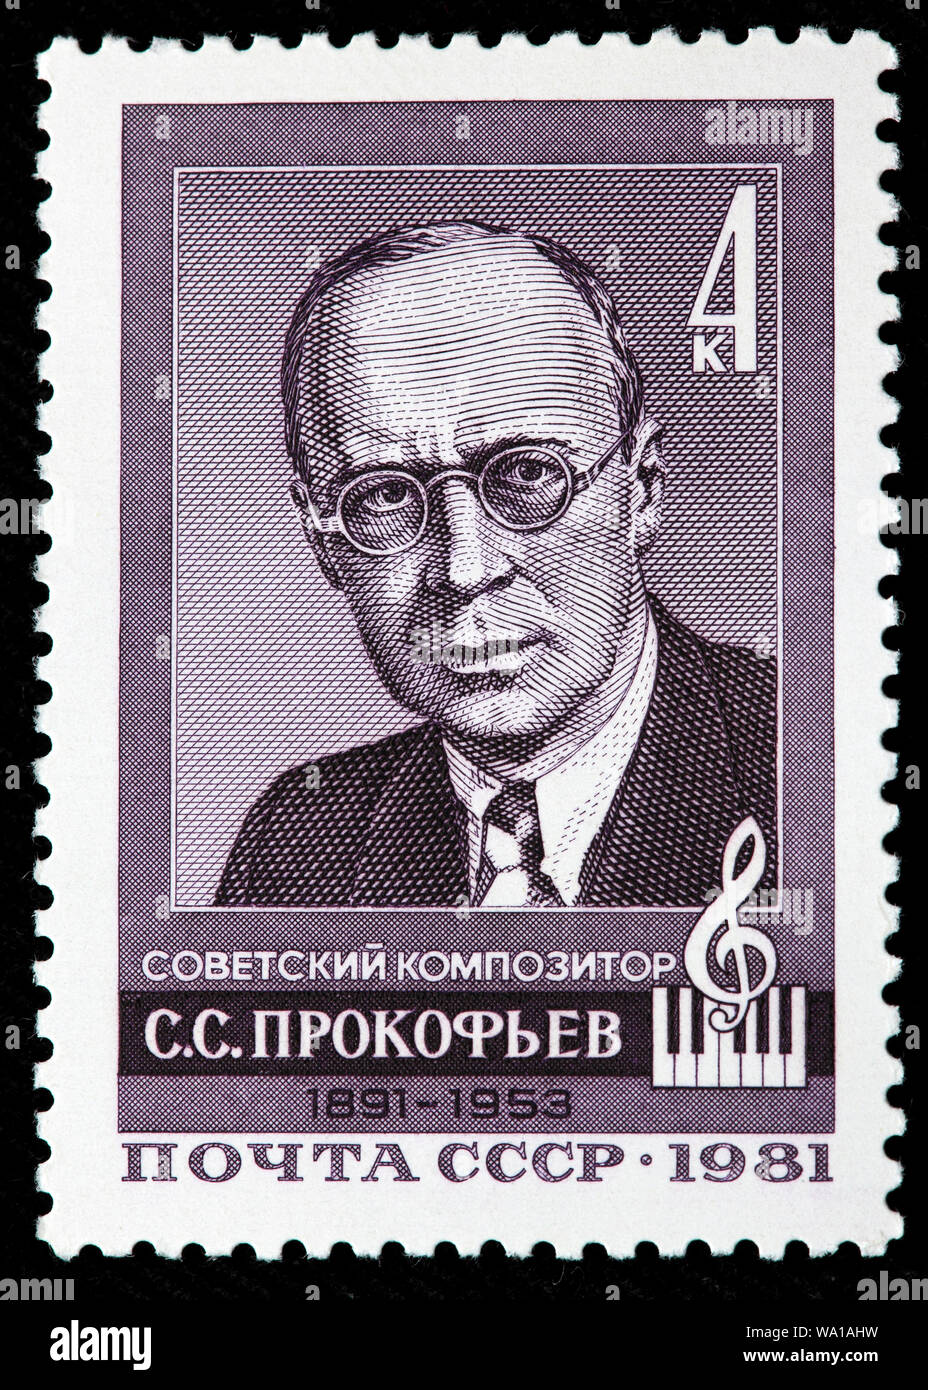 Sergei Prokofiev (1891-1953), Russian composer, pianist, conductor, postage stamp, Russia, USSR, 1981 Stock Photo